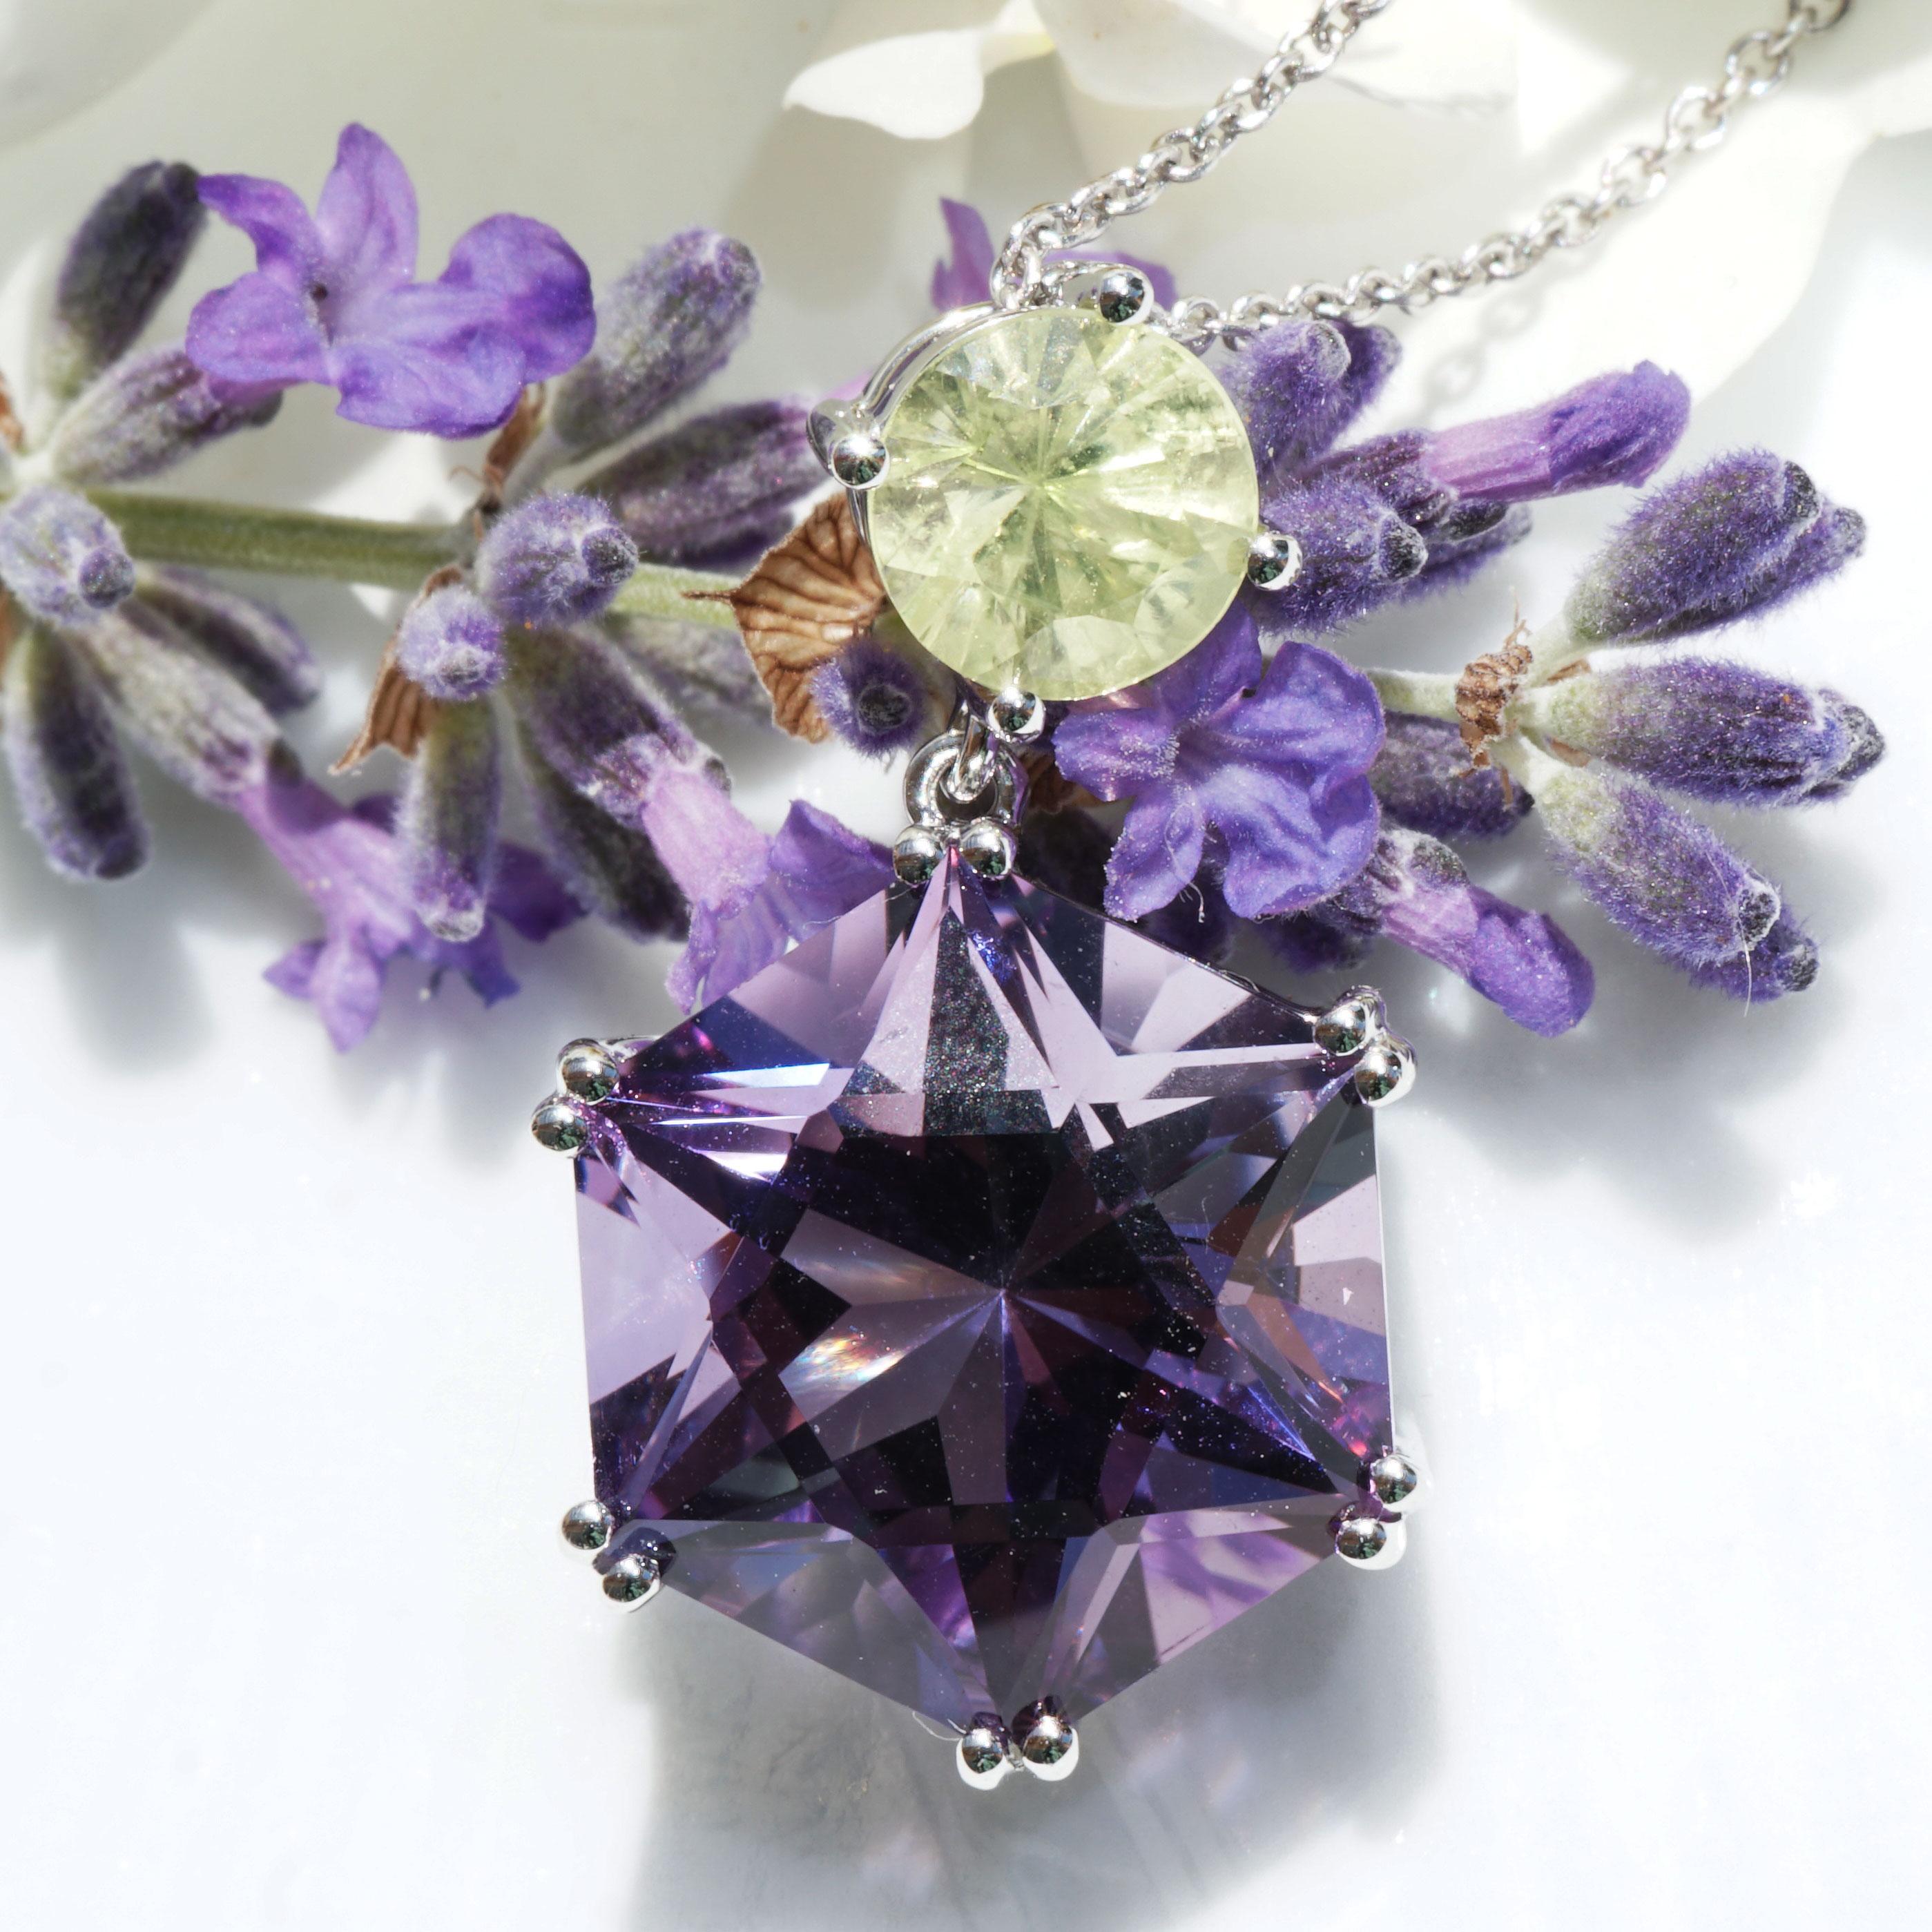 Chrysoberyll Amethyst Pendant with Chain neverseen Colors 10 ct Star Cut Brazil For Sale 4